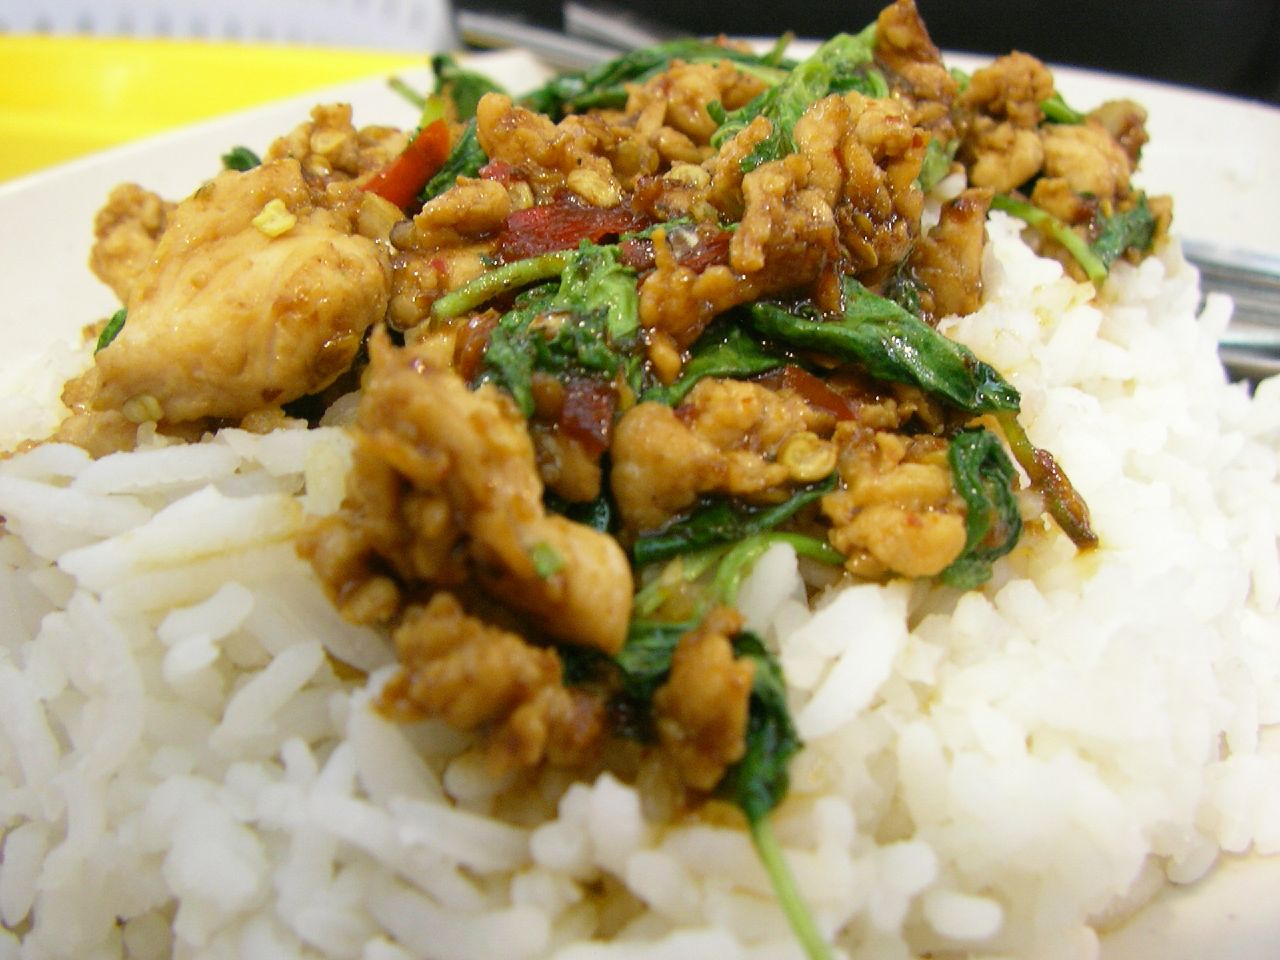 chicken, spinach and rice served on a plate